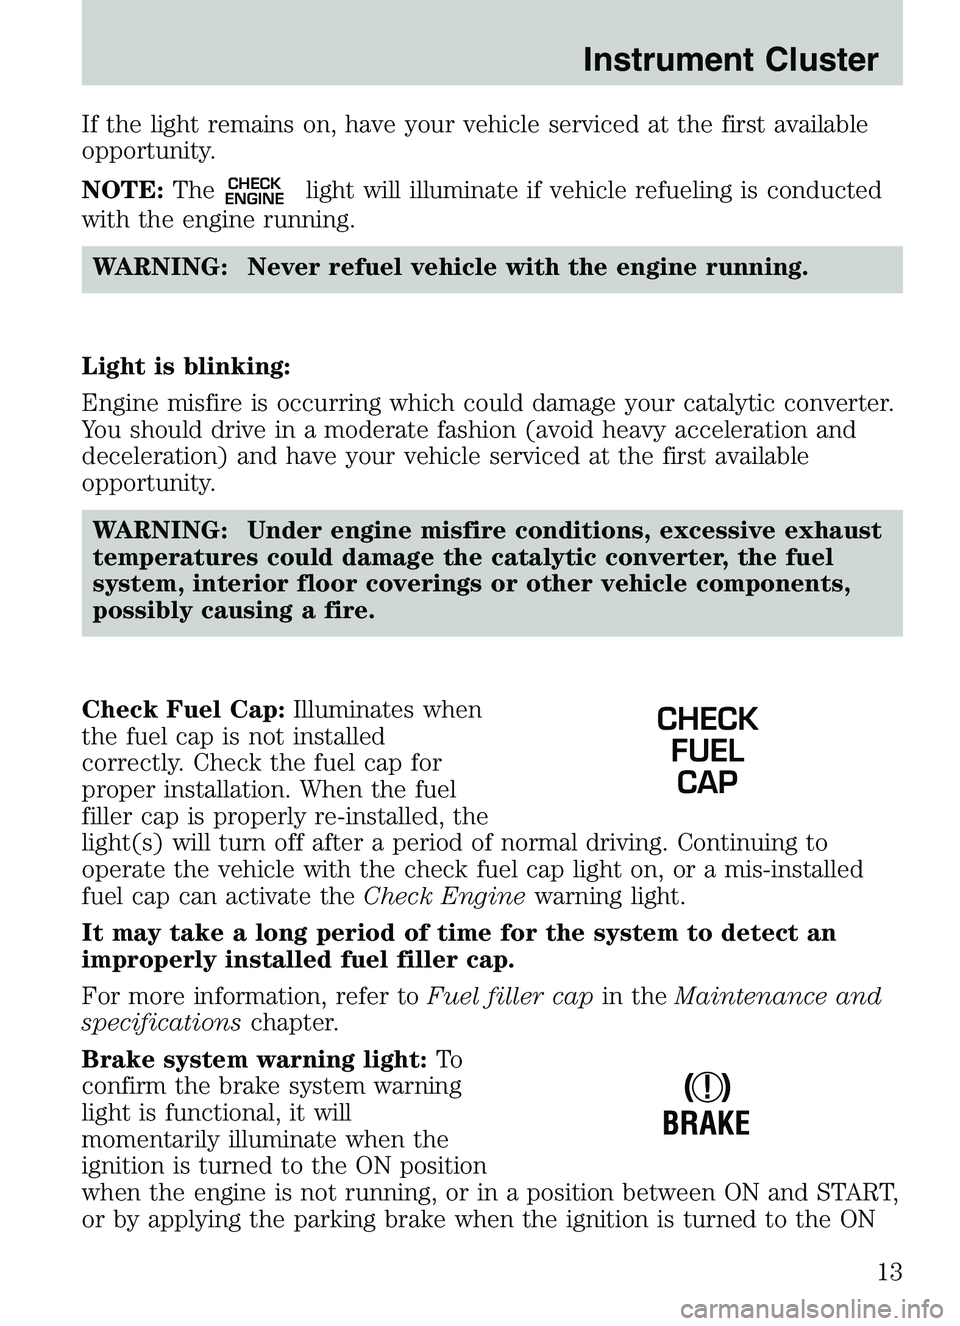 MAZDA MODEL B4000 2003  Owners Manual If the light remains on, have your vehicle serviced at the first available
opportunity.
NOTE:The
CHECK
ENGINElight will illuminate if vehicle refueling is conducted
with the engine running.
WARNING: N